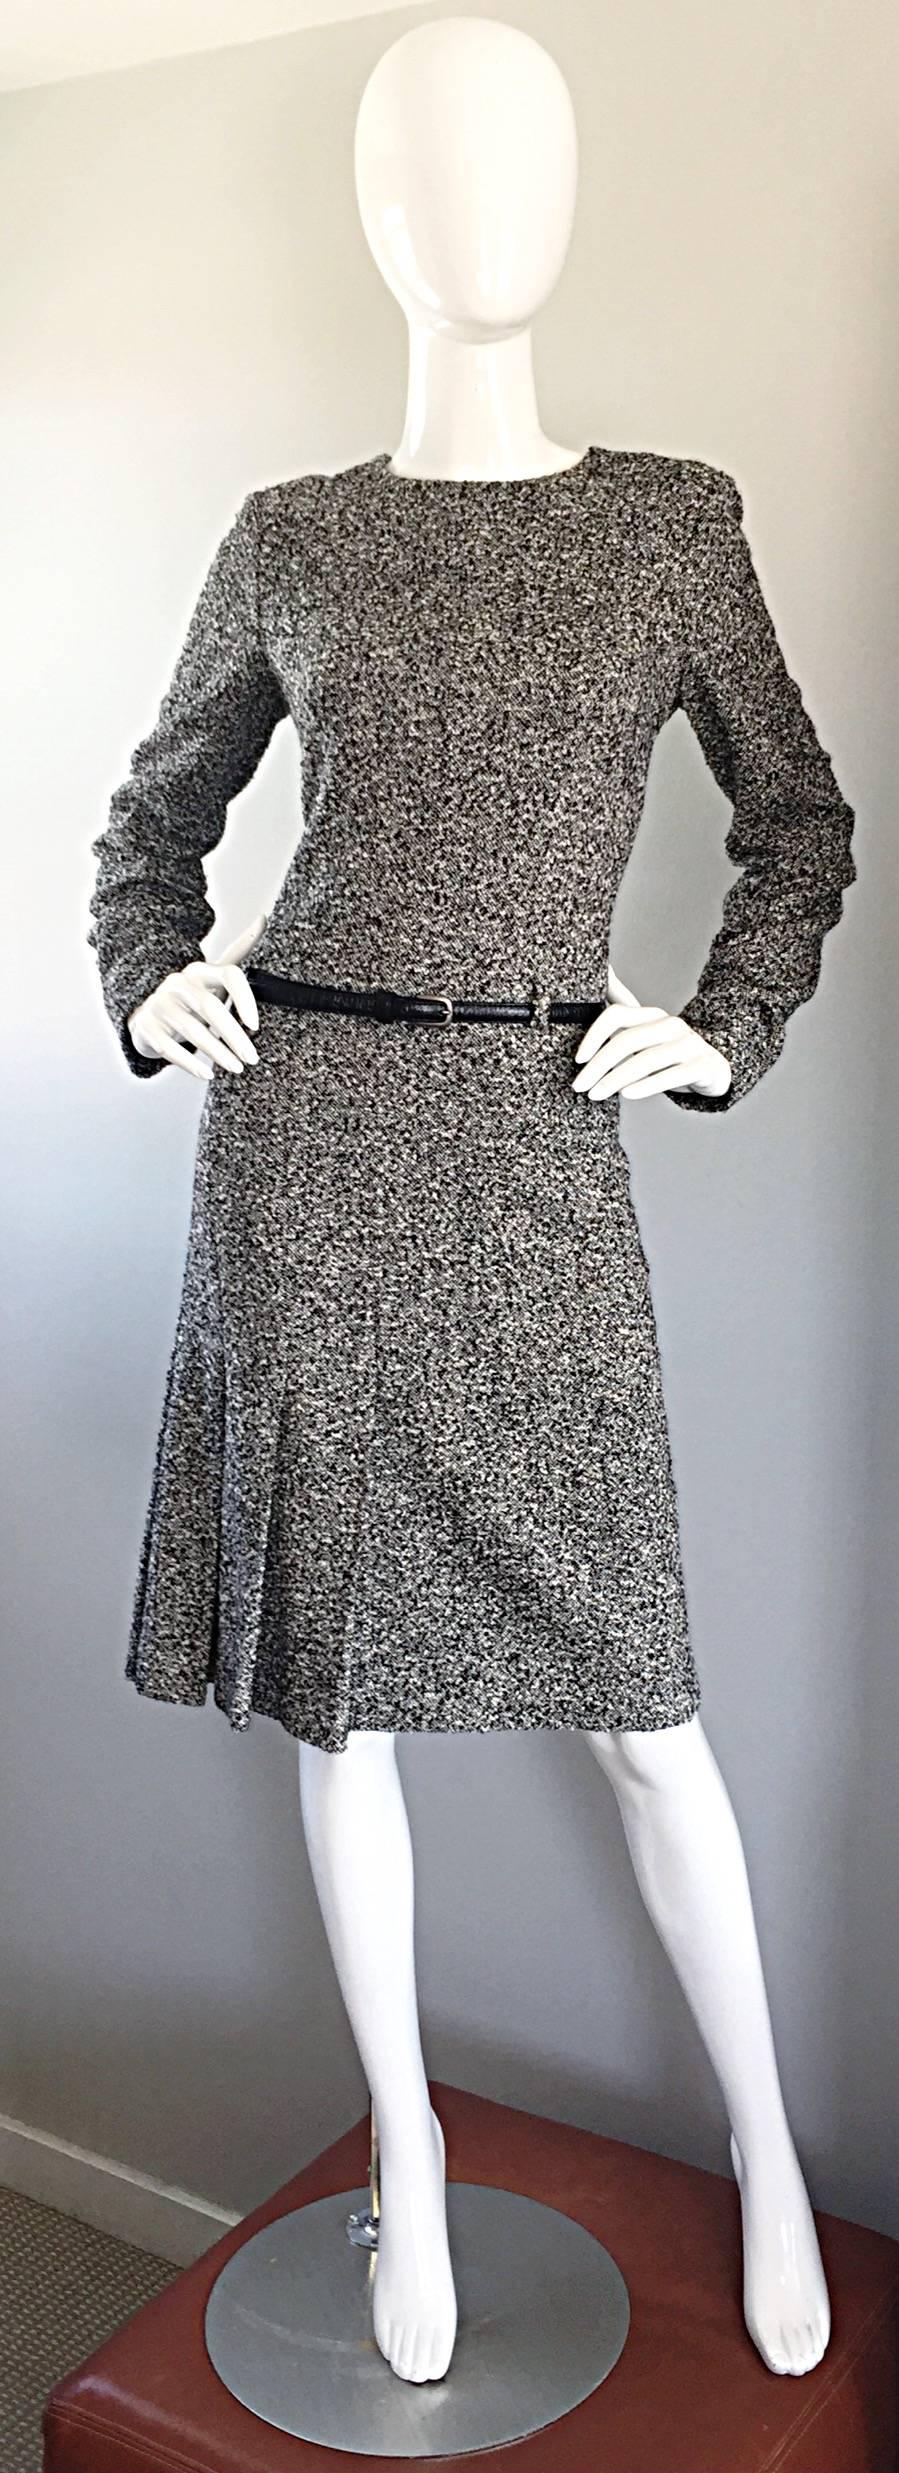 Sophisticated and Chic vintage 90s OSCAR DE LA RENTA , for SAKS 5th AVENUE, long sleeve black and white tweed belted dress! Amazing tailored fit with sleek long sleeves, and a thin detachable alligator embossed leather belt. Chic ruffle at left hem.